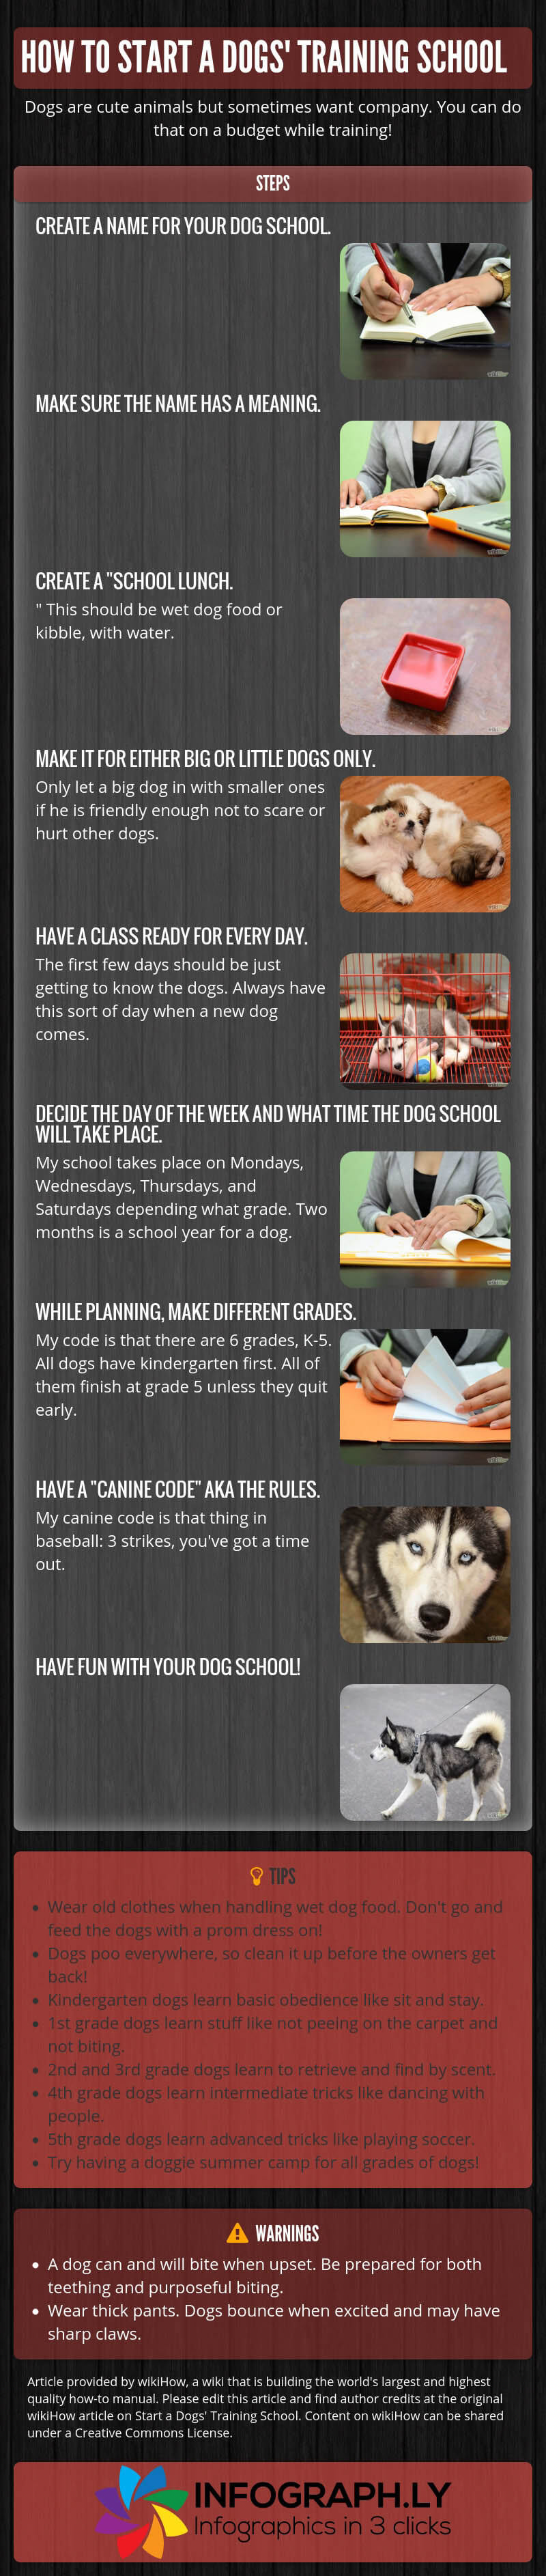 Dog Training & Teaching INFOGRAFICS - PRESS TO SEE IN FULL SIZE!